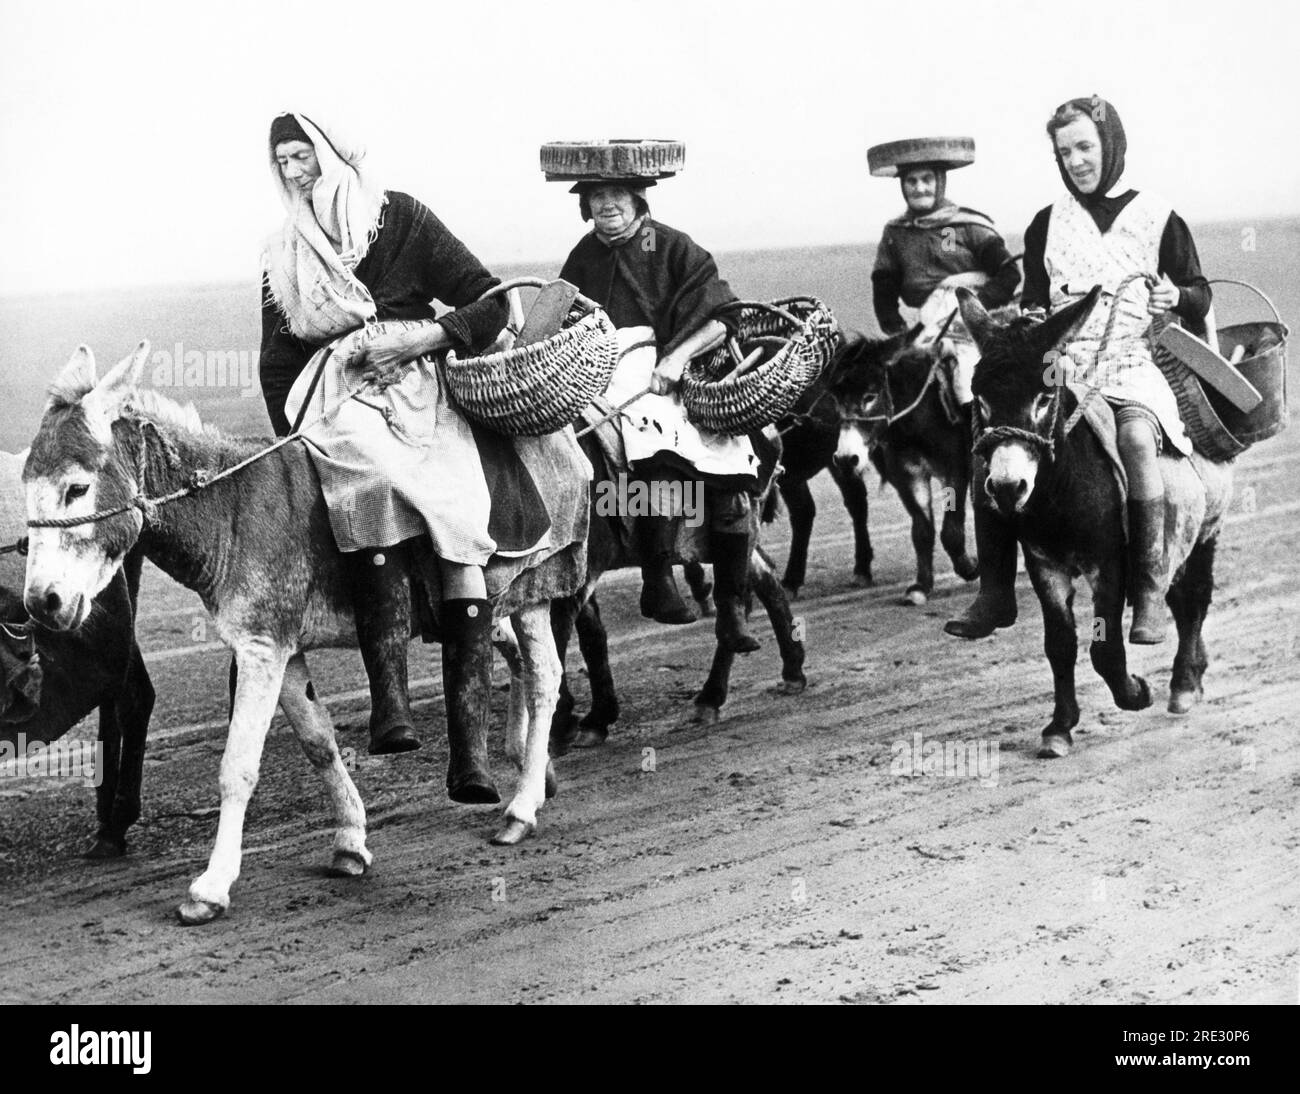 Wales, UK:  October 17, 1947 Women riding their donkeys on the Llanrhidian sands in South Wales in search of cockles left by the ebbing tide. Stock Photo